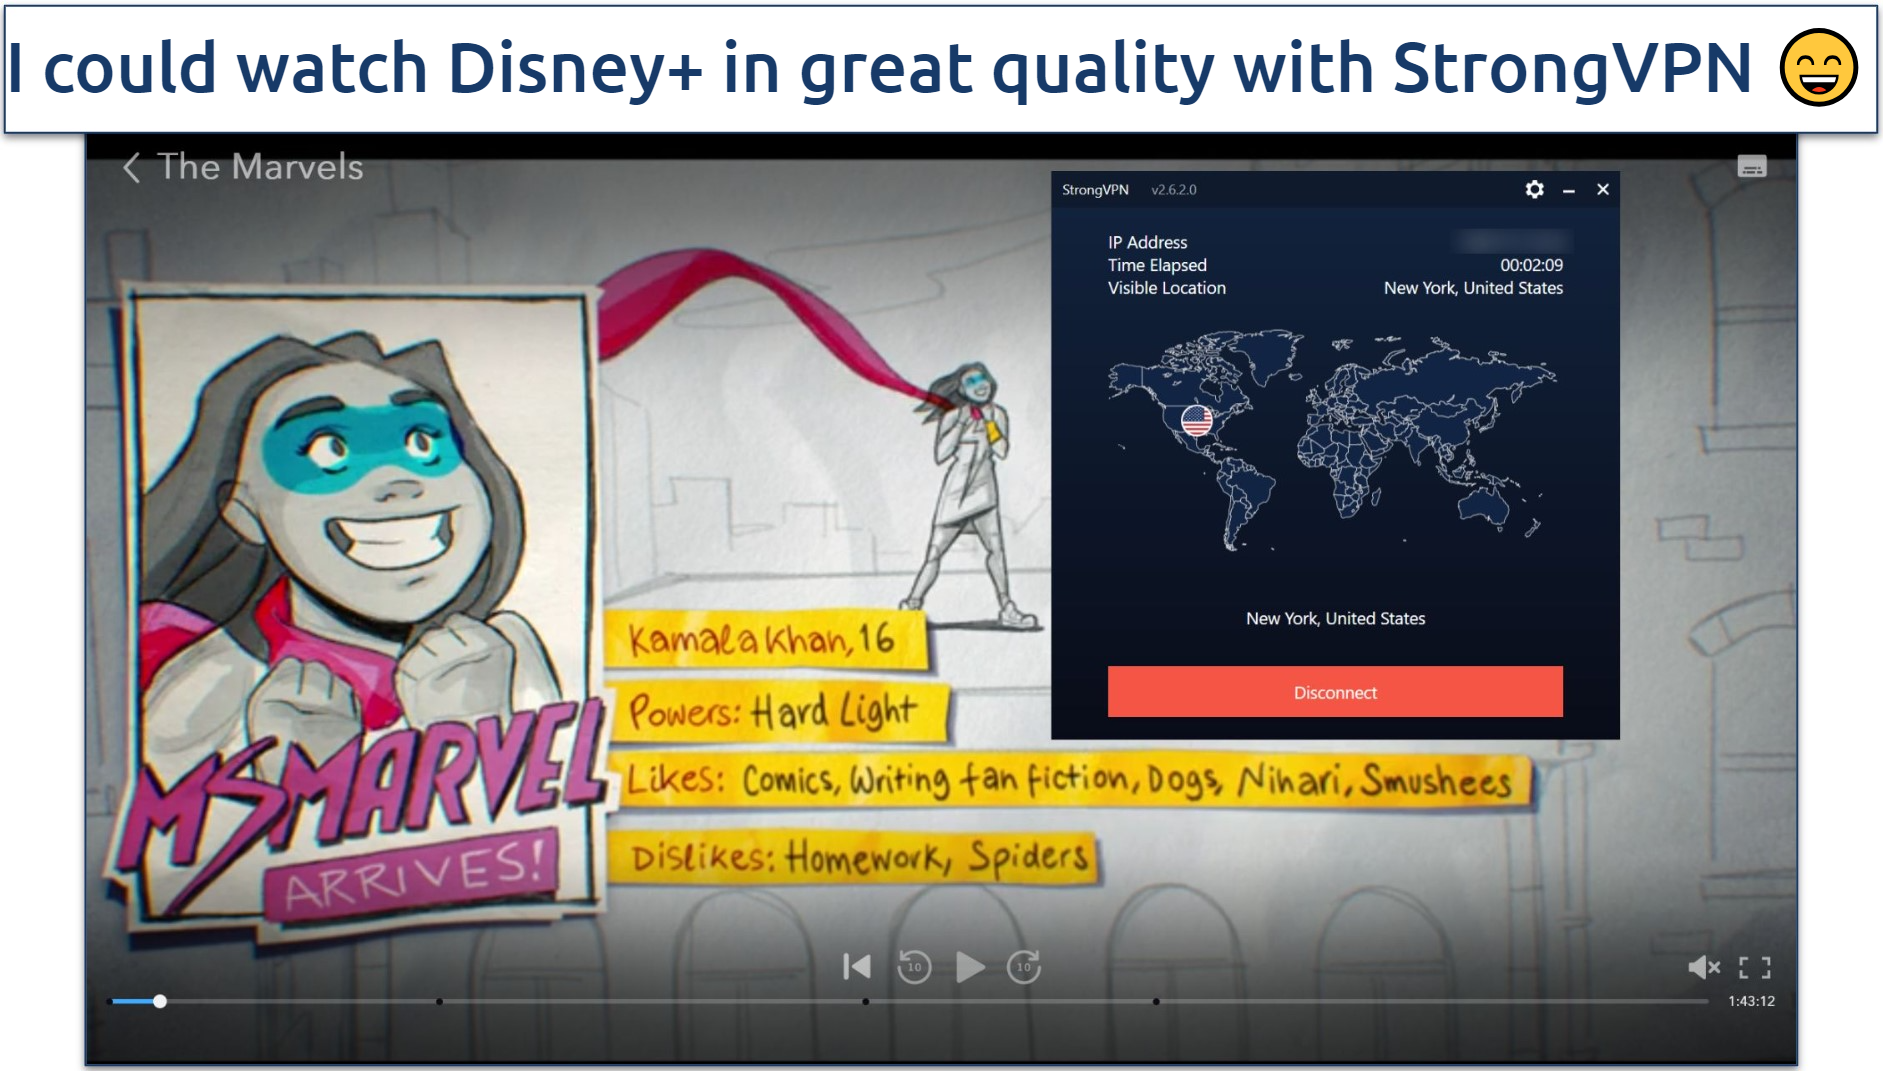 Screenshot of Disney+ player streaming The Marvels while connected to StrongVPN's New York server 